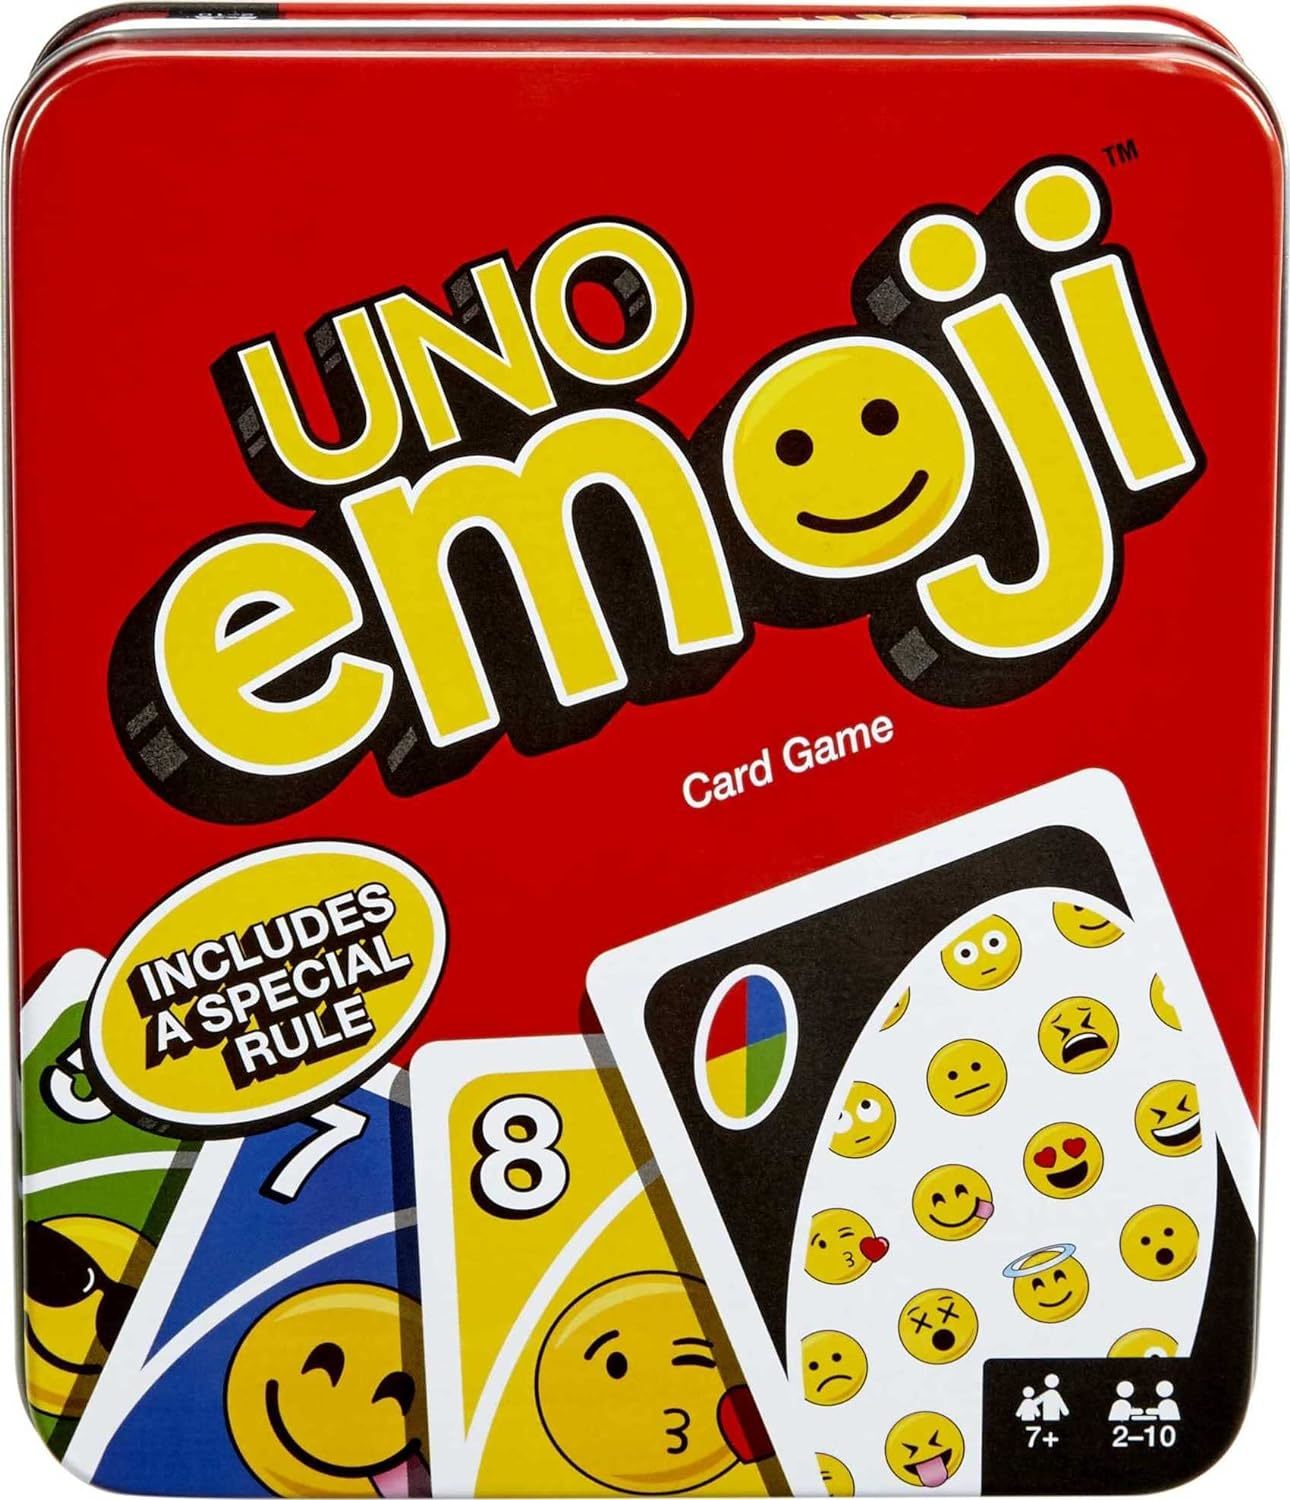 Primary image for UNO Emoji Card Game for Family Night Travel Game with Emoji Graphics Special Rul